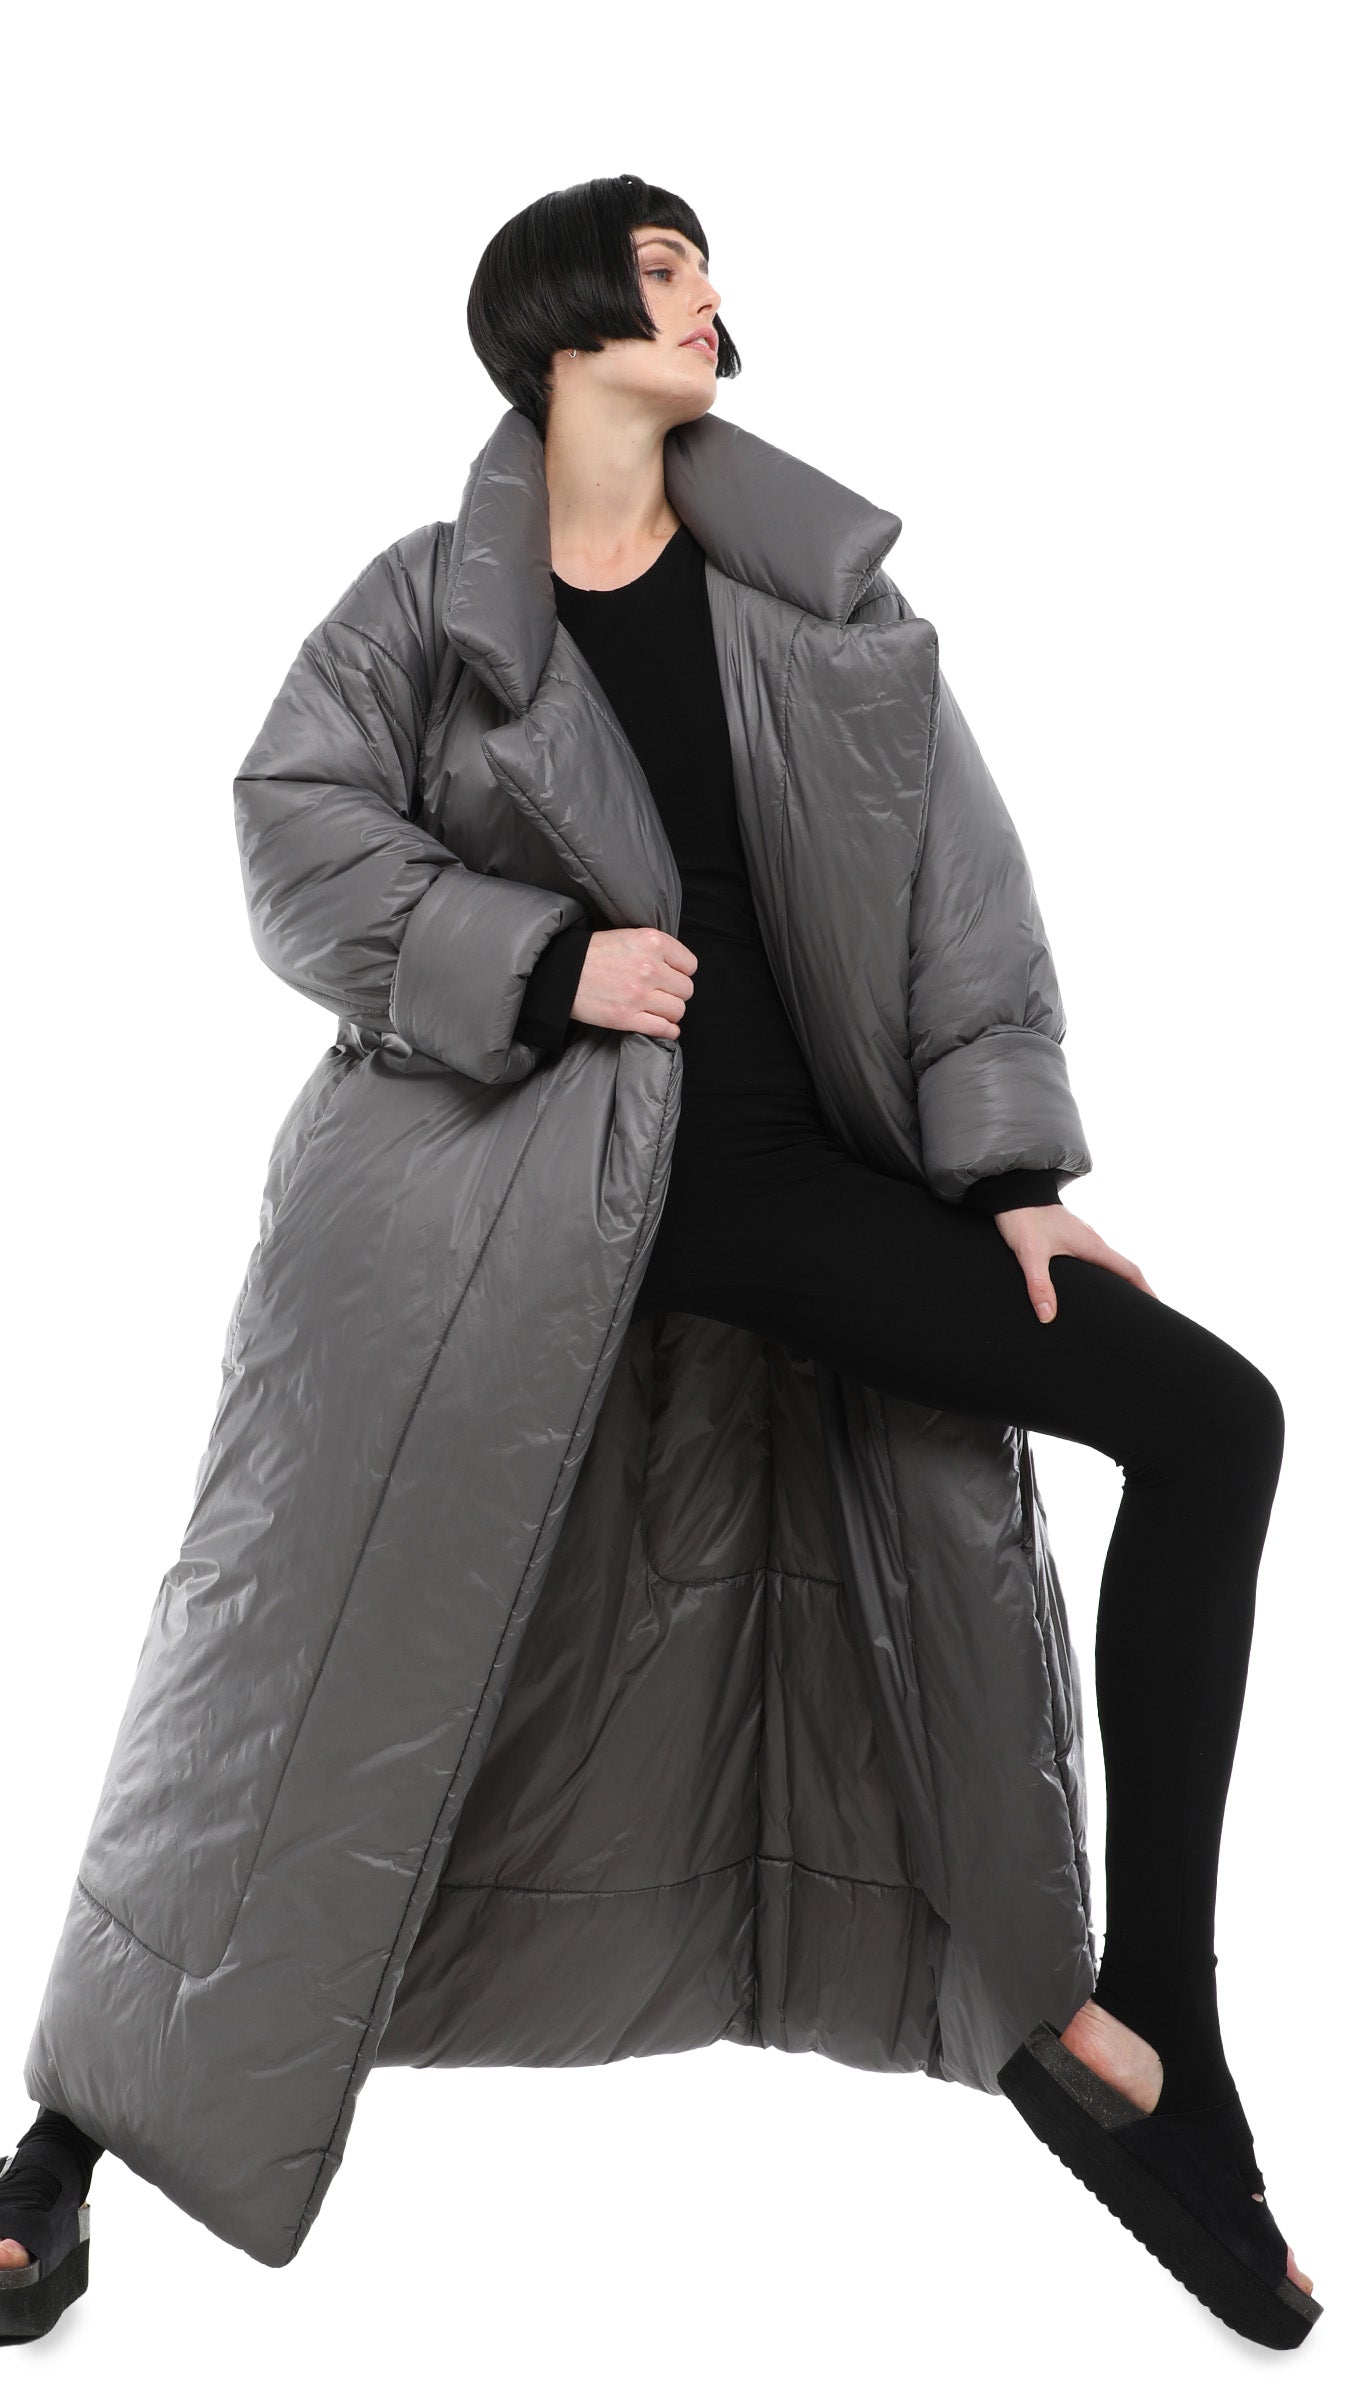 Instantly transform into a pack! An unprecedented convertible jacket from  Alk Phenix. – GO OUT